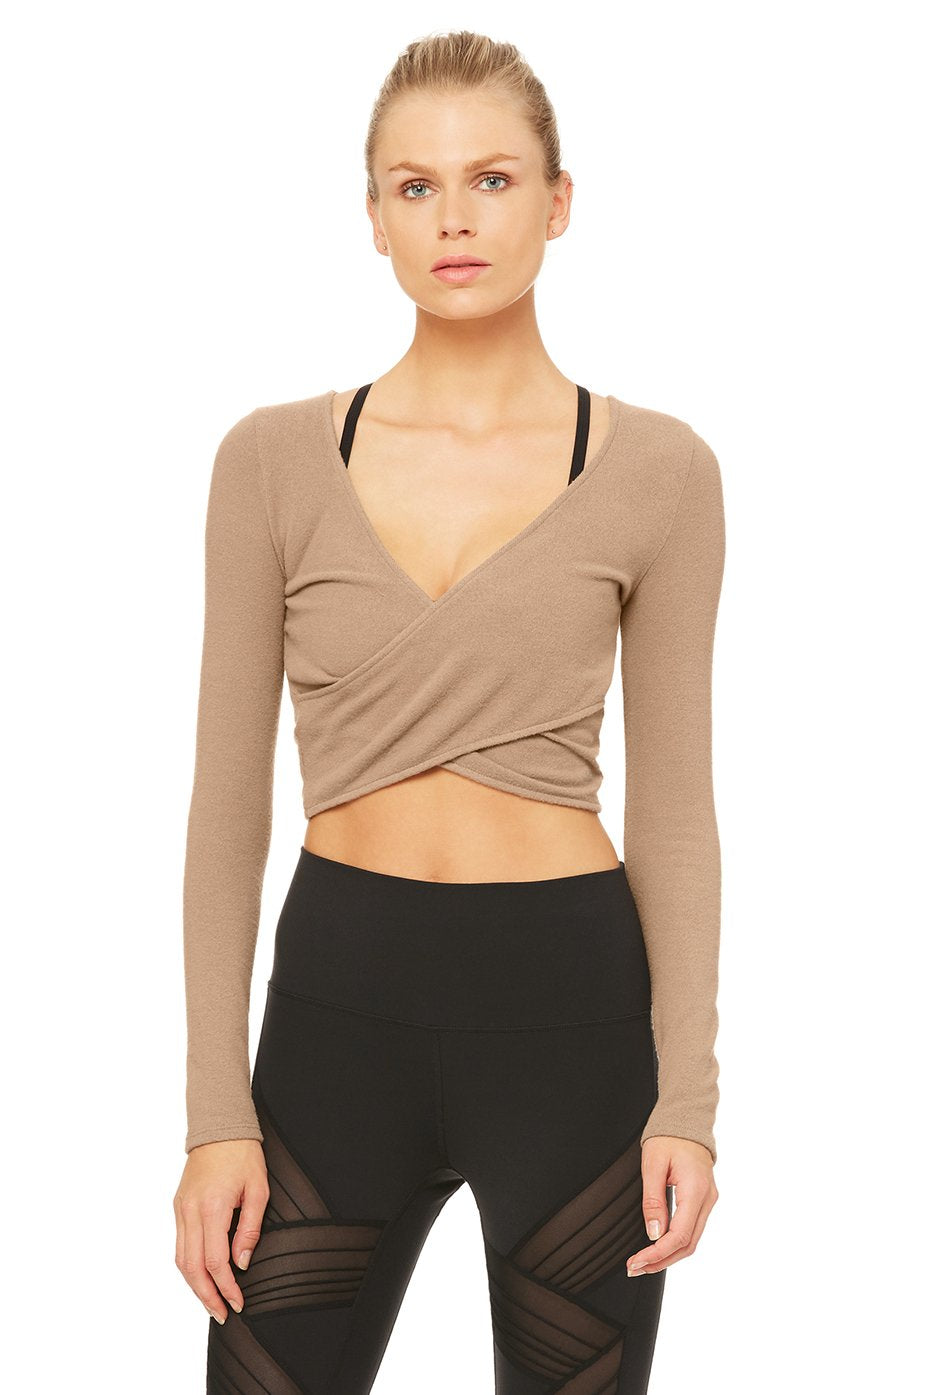 Amelia Luxe Long Sleeve Crop Top in Gravel by Alo Yoga